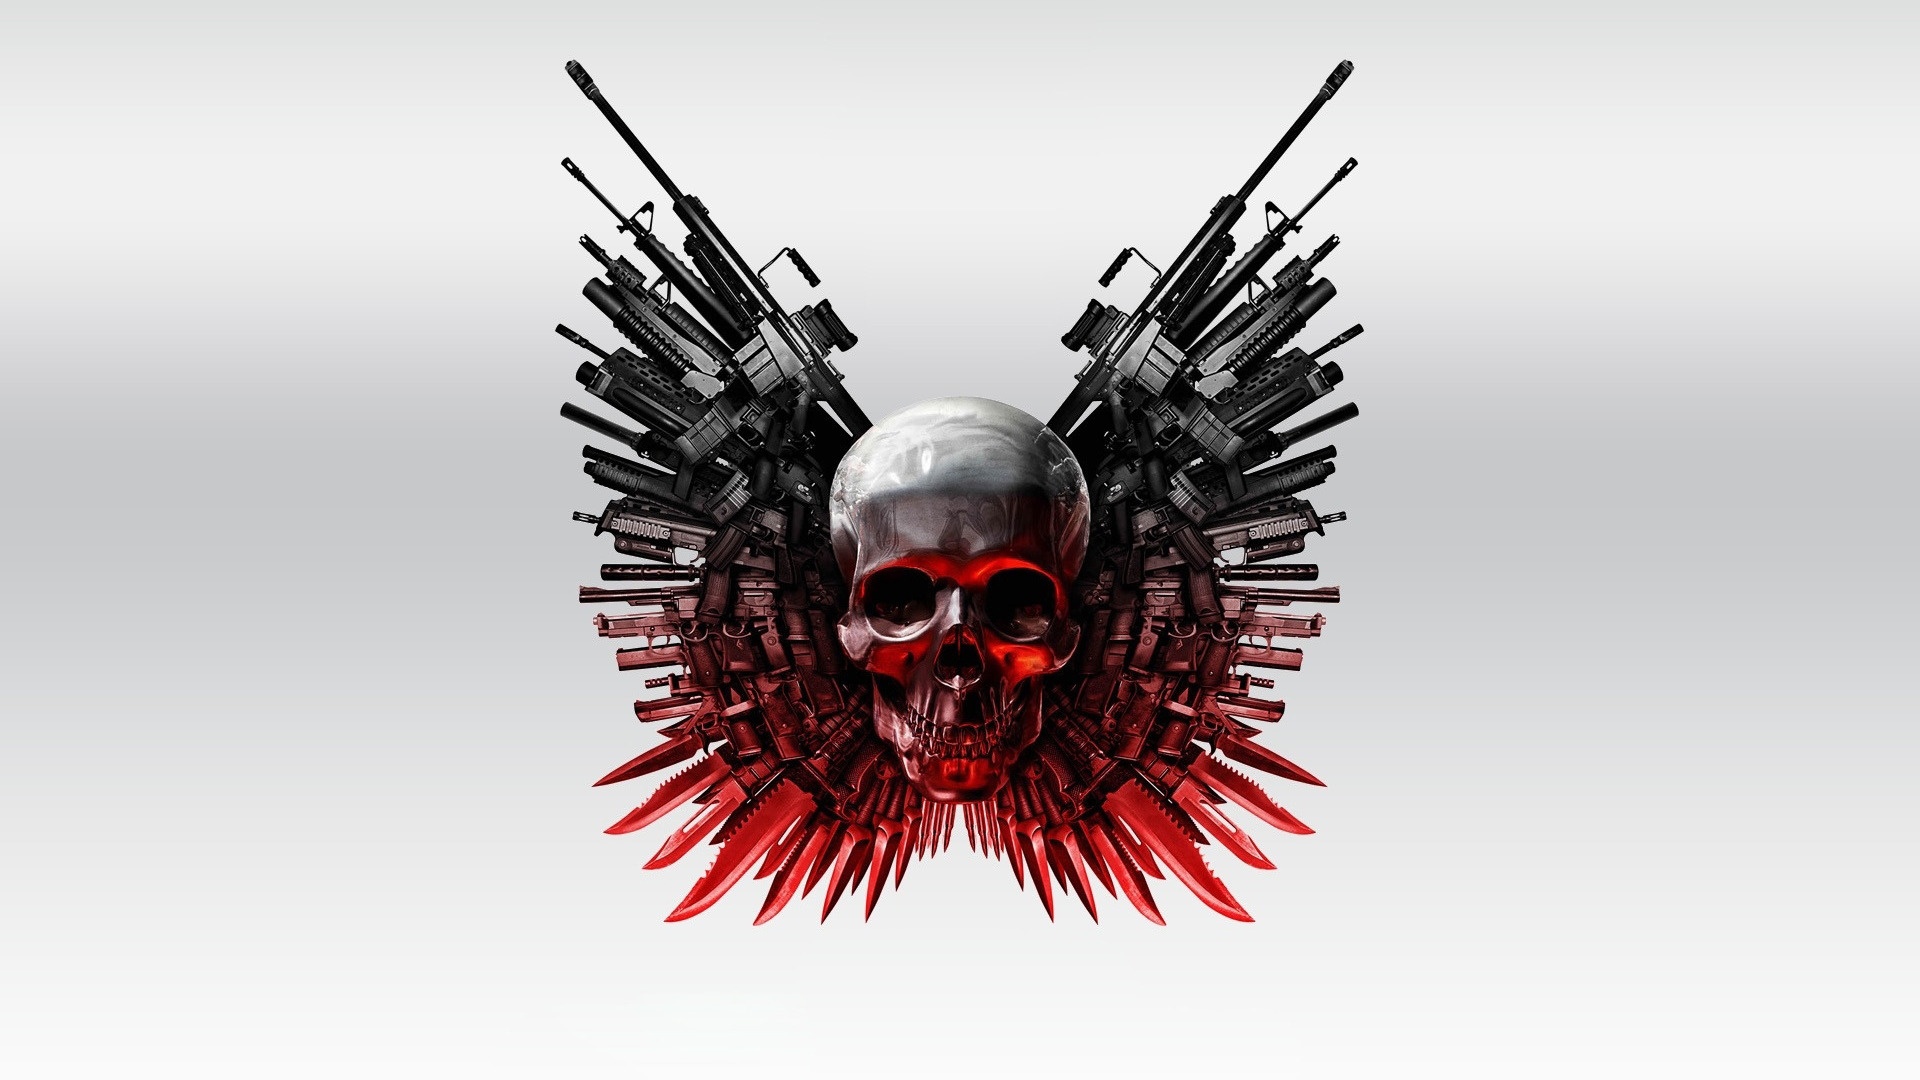 Wallpaper Weapons And Skull Background HD